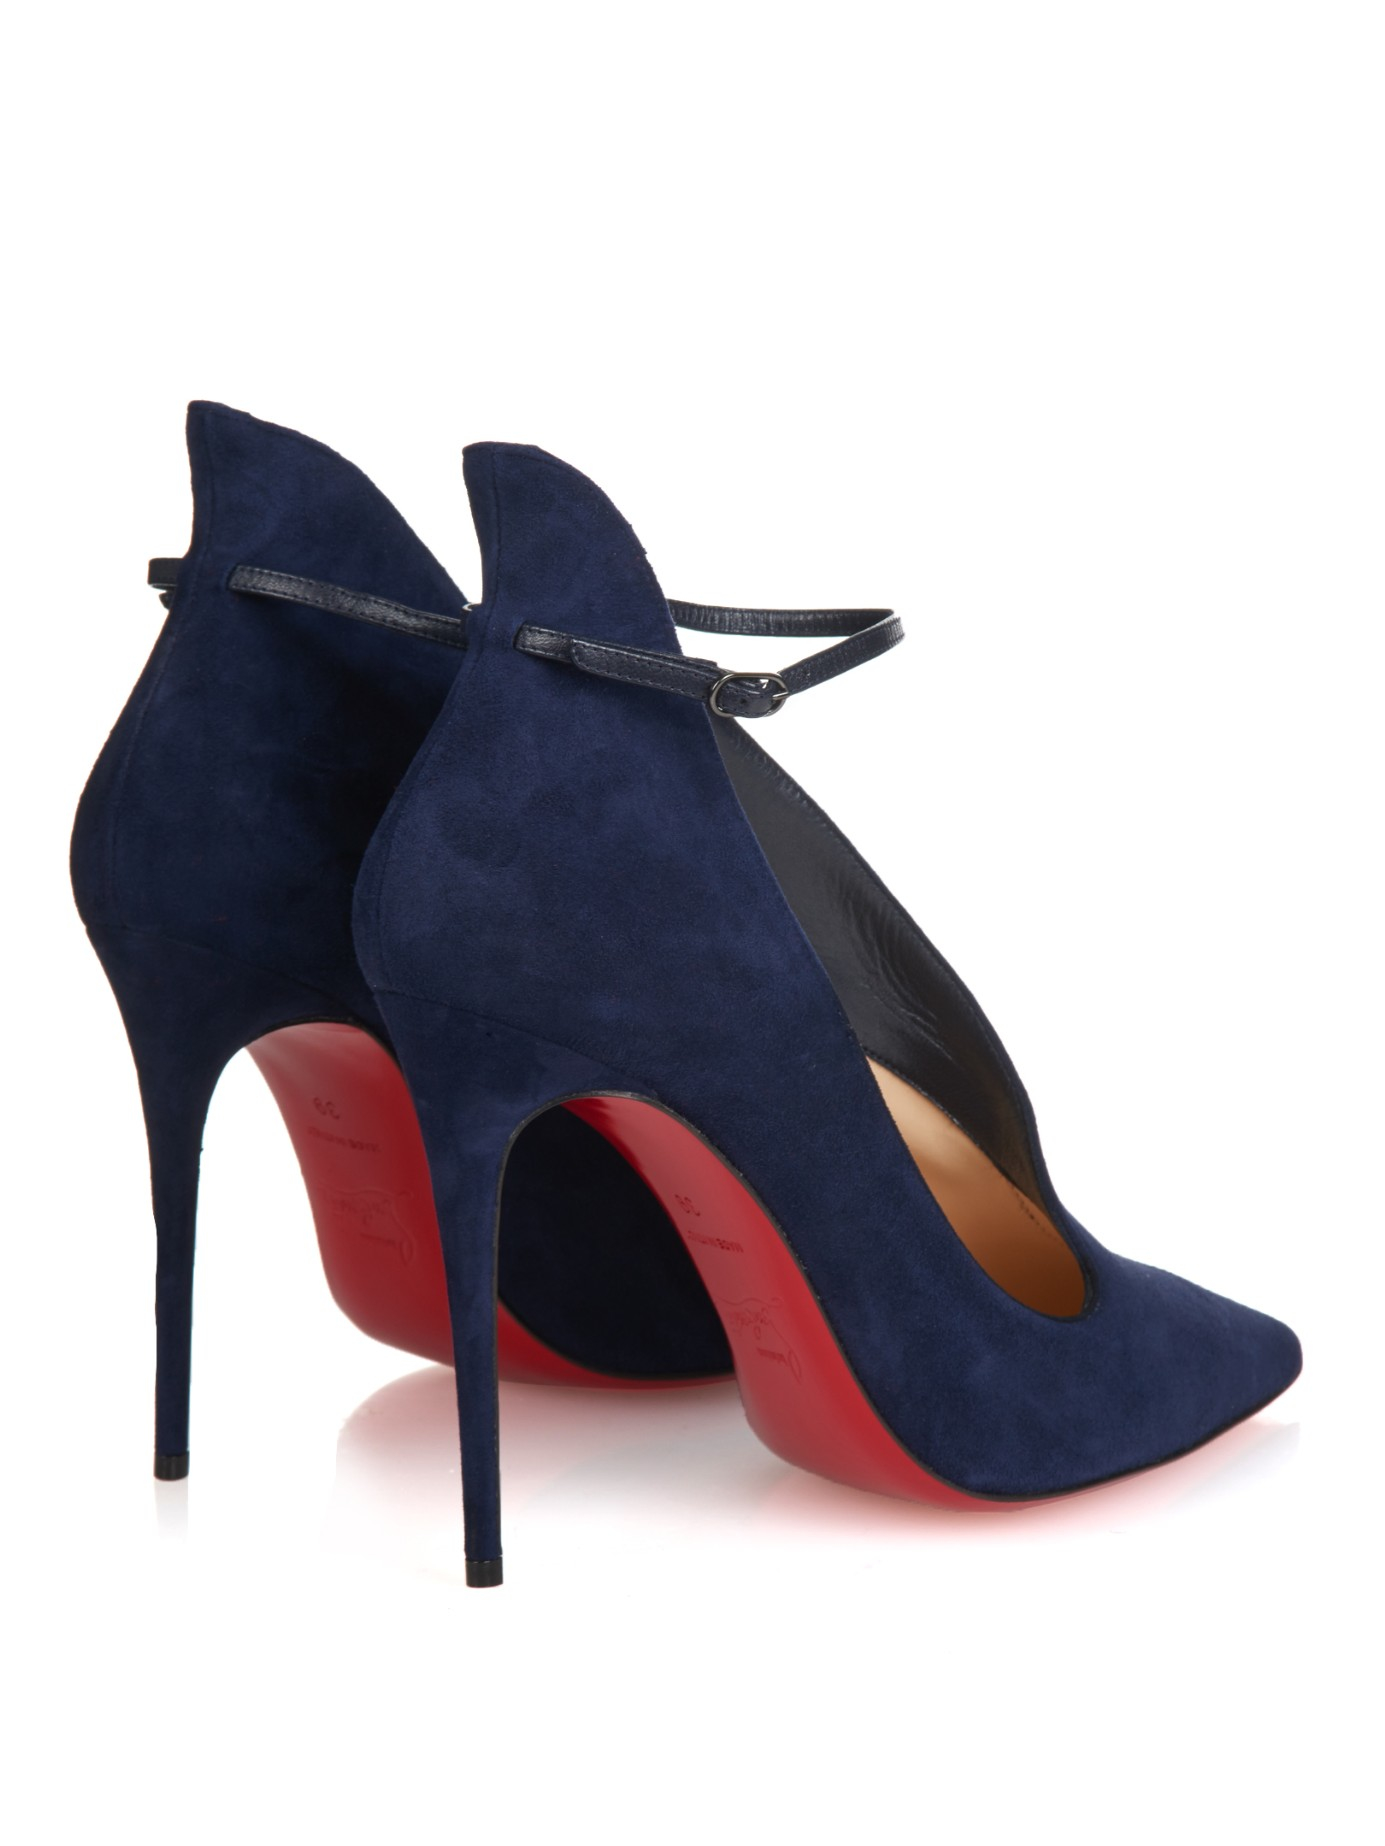 Christian louboutin Vampydoly Suede Pumps in Blue (NAVY) | Lyst